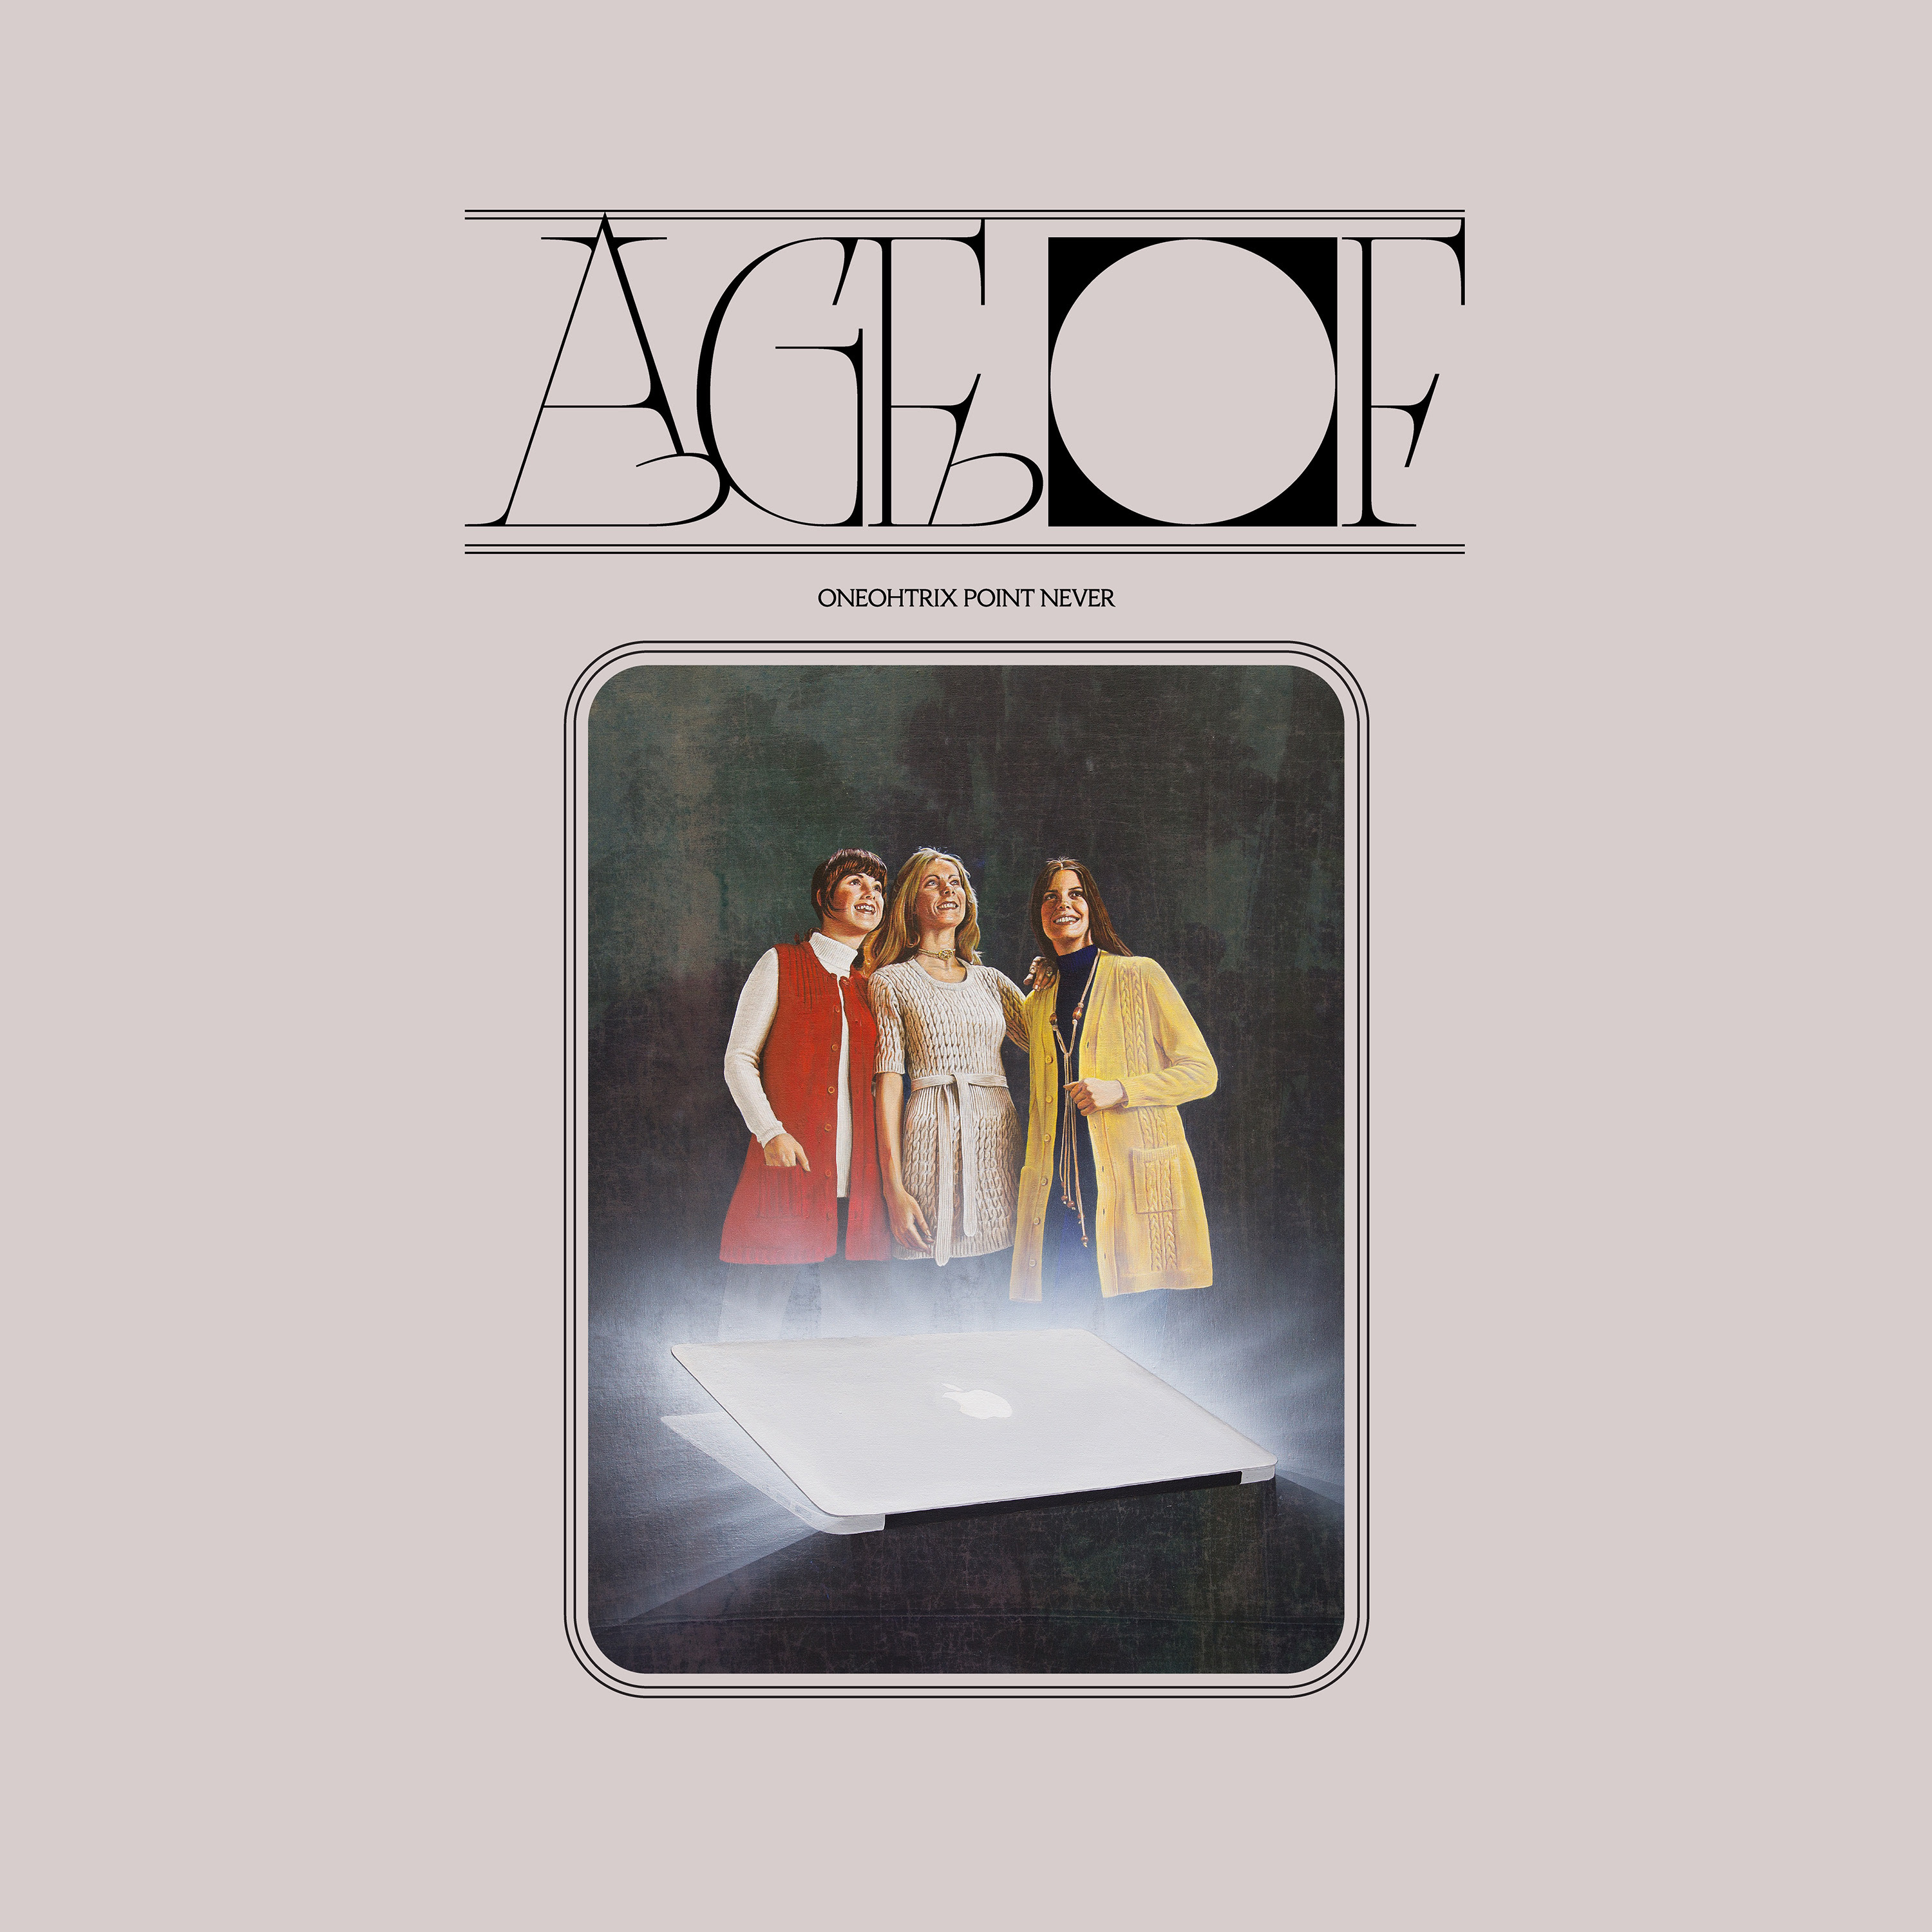 Oneohtrix Point Never Announces New Album <i>Age Of</i>” title=”unnamed-39-1522858489″ data-original-id=”284639″ data-adjusted-id=”284639″ class=”sm_size_full_width sm_alignment_center ” data-image-source=”getty” />
</p>		</div>
				</div>
						</div>
					</div>
		</div>
								</div>
					</div>
		</section>
				<section data-particle_enable=